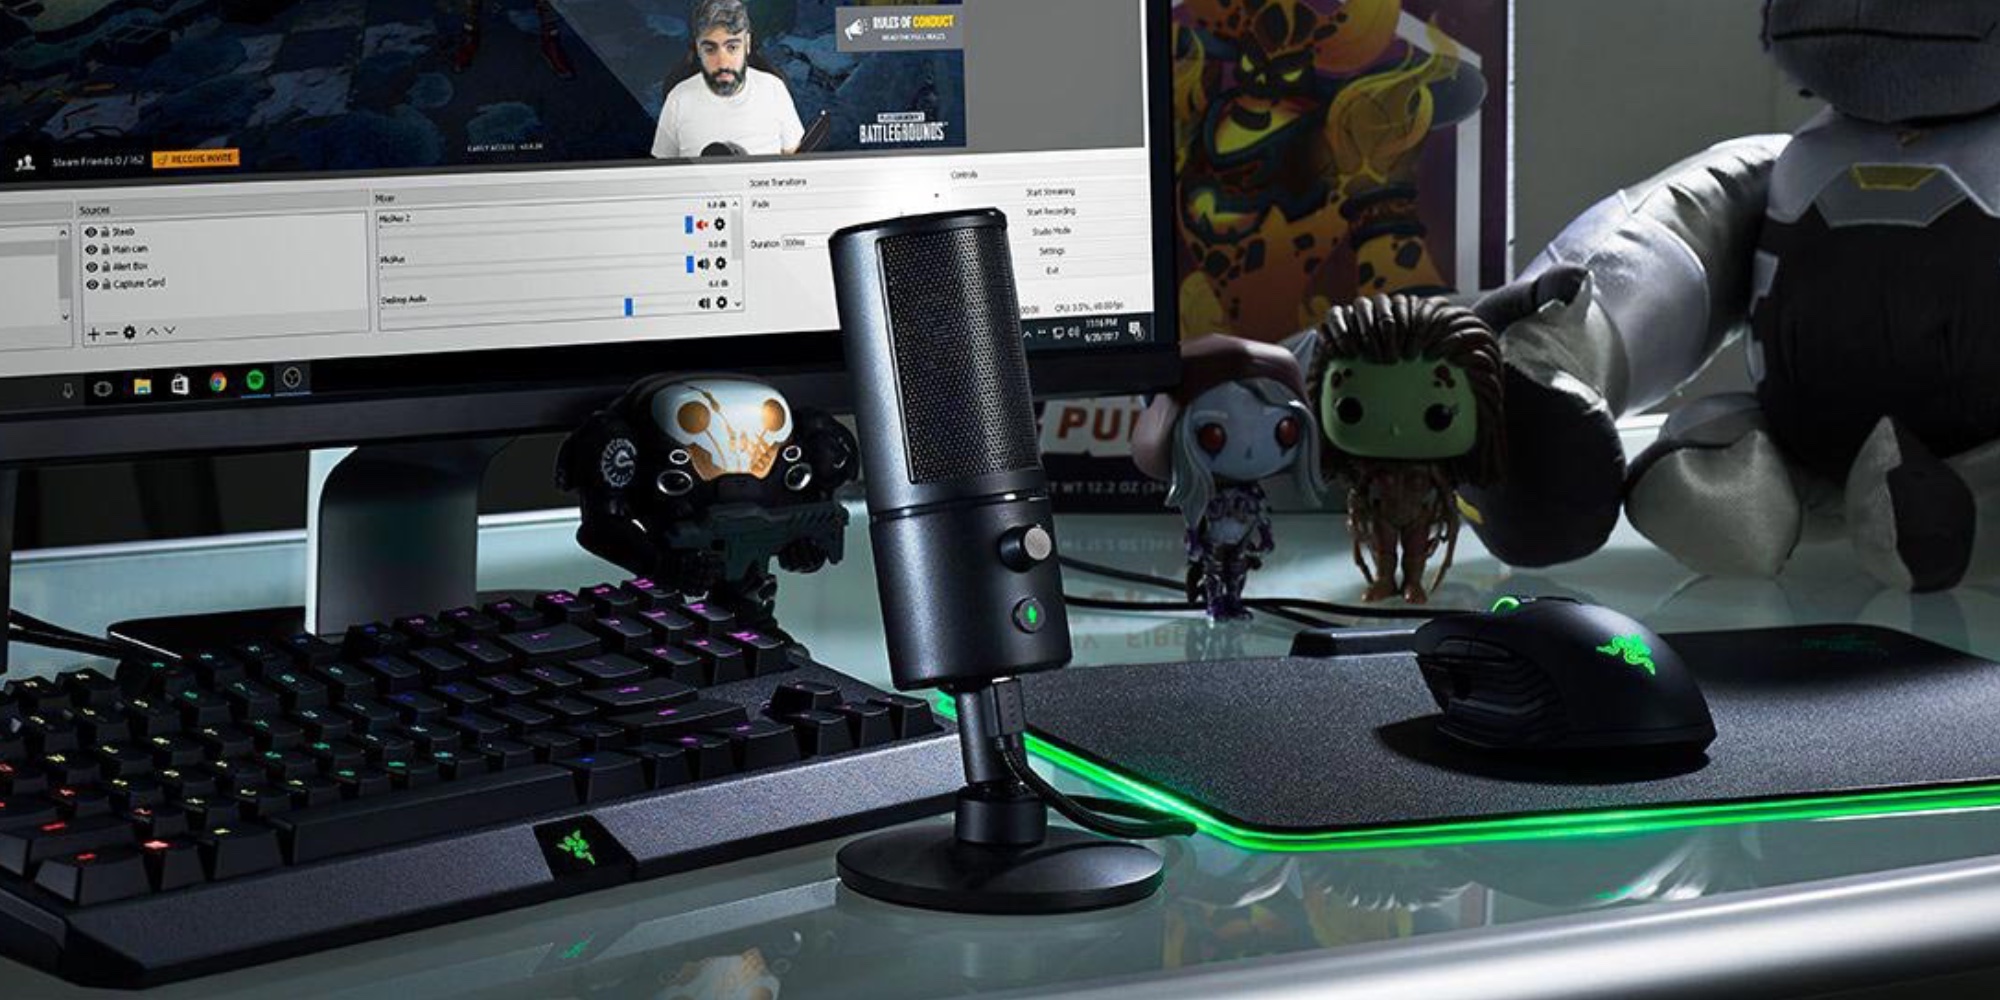 Razer S Seiren X Streaming Mic Falls To Best Price In Months At 80 Save 9to5toys